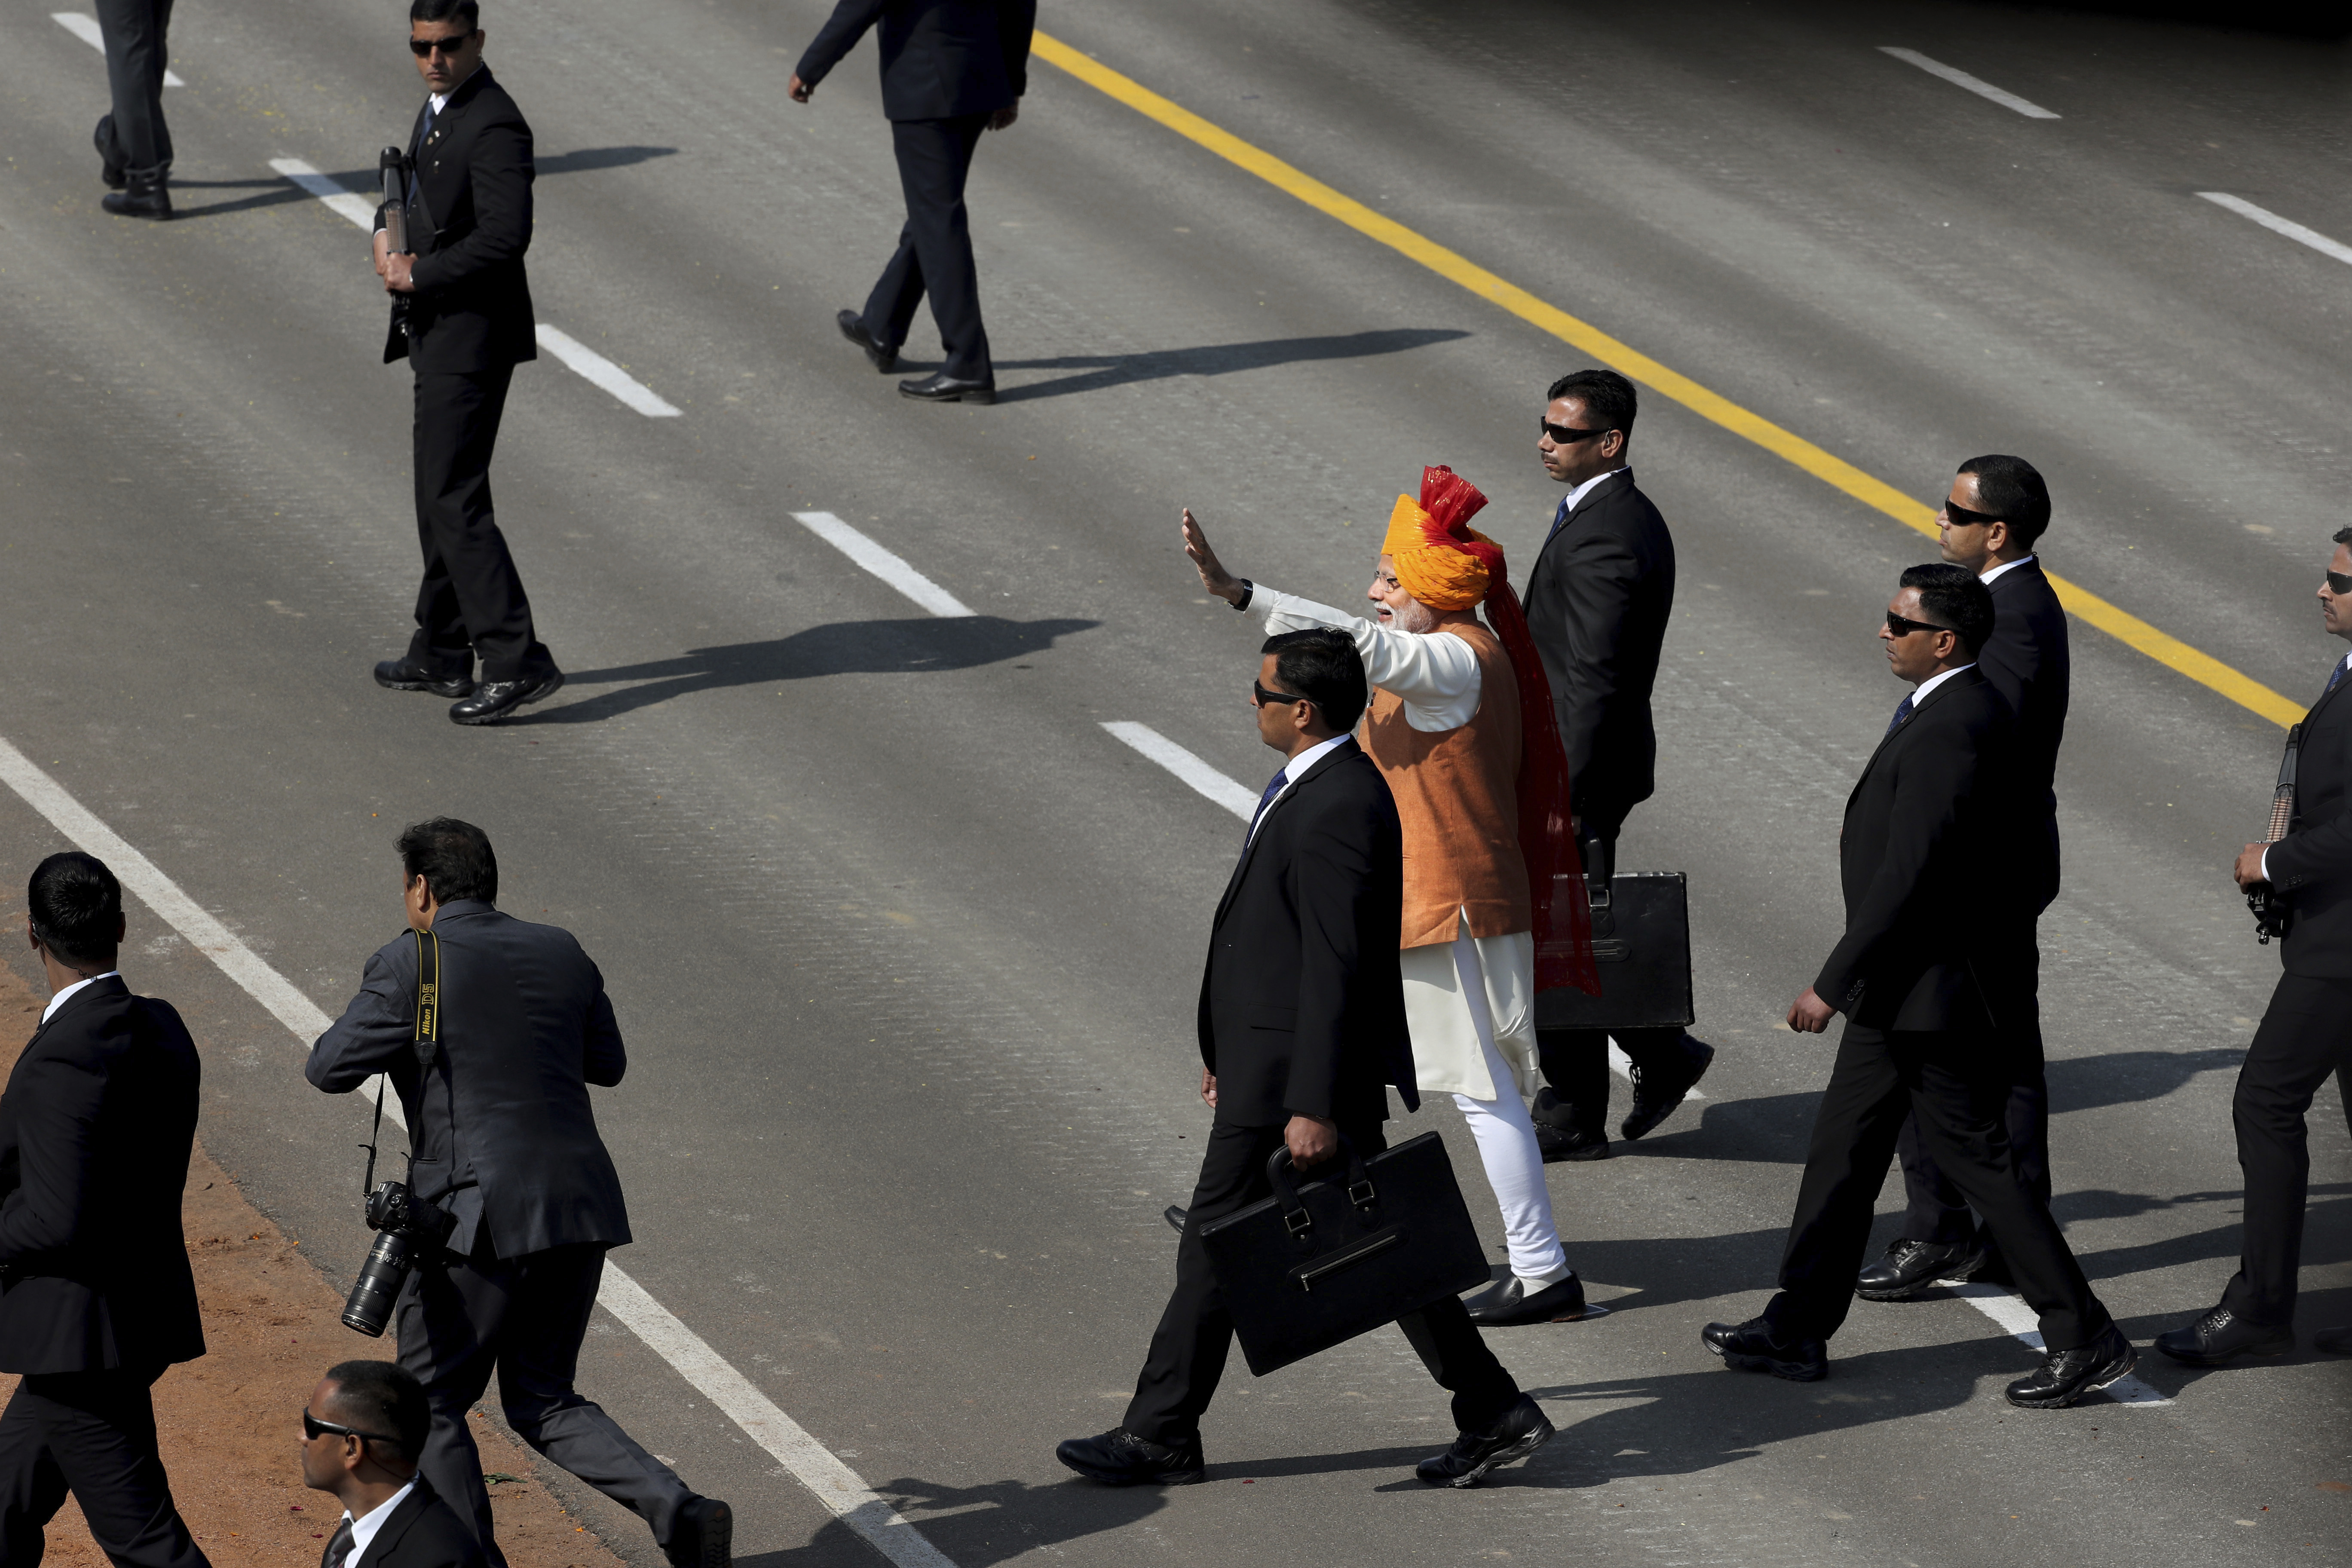 Indian Prime Minister Narendra Modi, center, waves to the crowd on Rajpath, the ceremonial boulevard, at the end of the Republic Day parade in New Delhi, India, Saturday, Jan. 26, 2019. Thousands of Indians have converged on a ceremonial boulevard to watch a display of the country's military power and cultural diversity amid tight security during national day celebrations. (AP Photo/Manish Swarup)